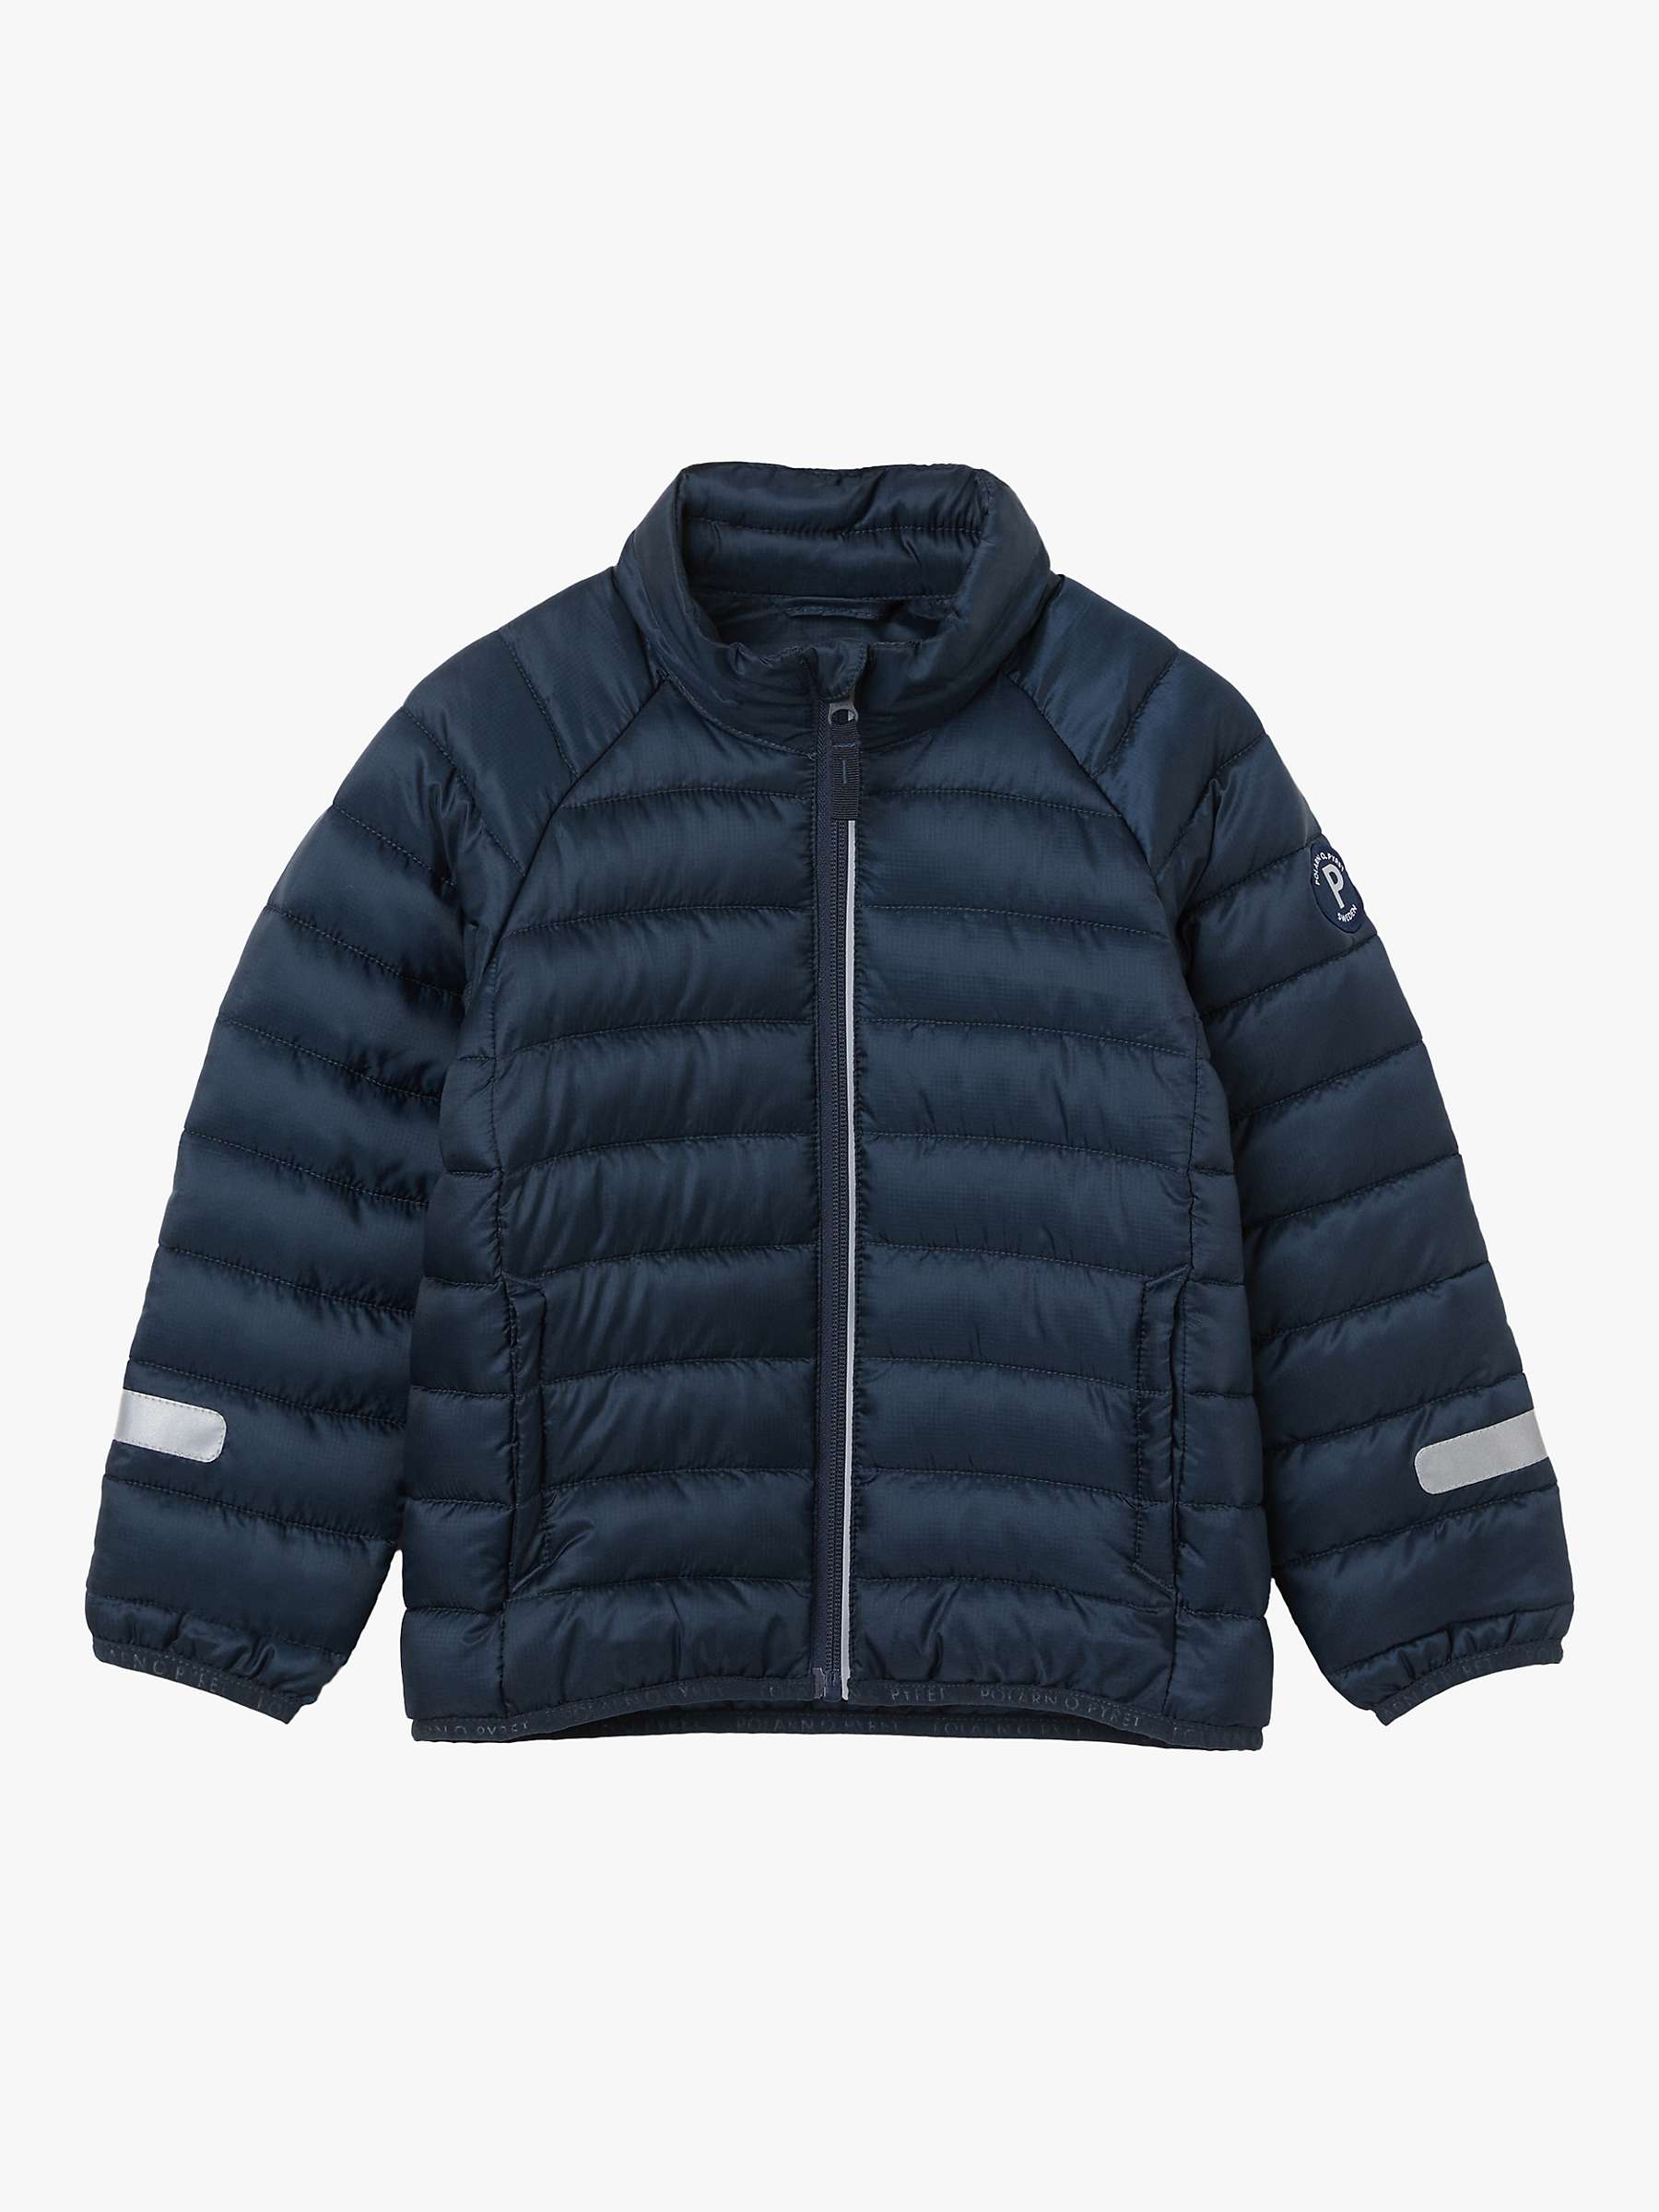 Buy Polarn O. Pyret Baby Quilted Jacket, Navy Online at johnlewis.com